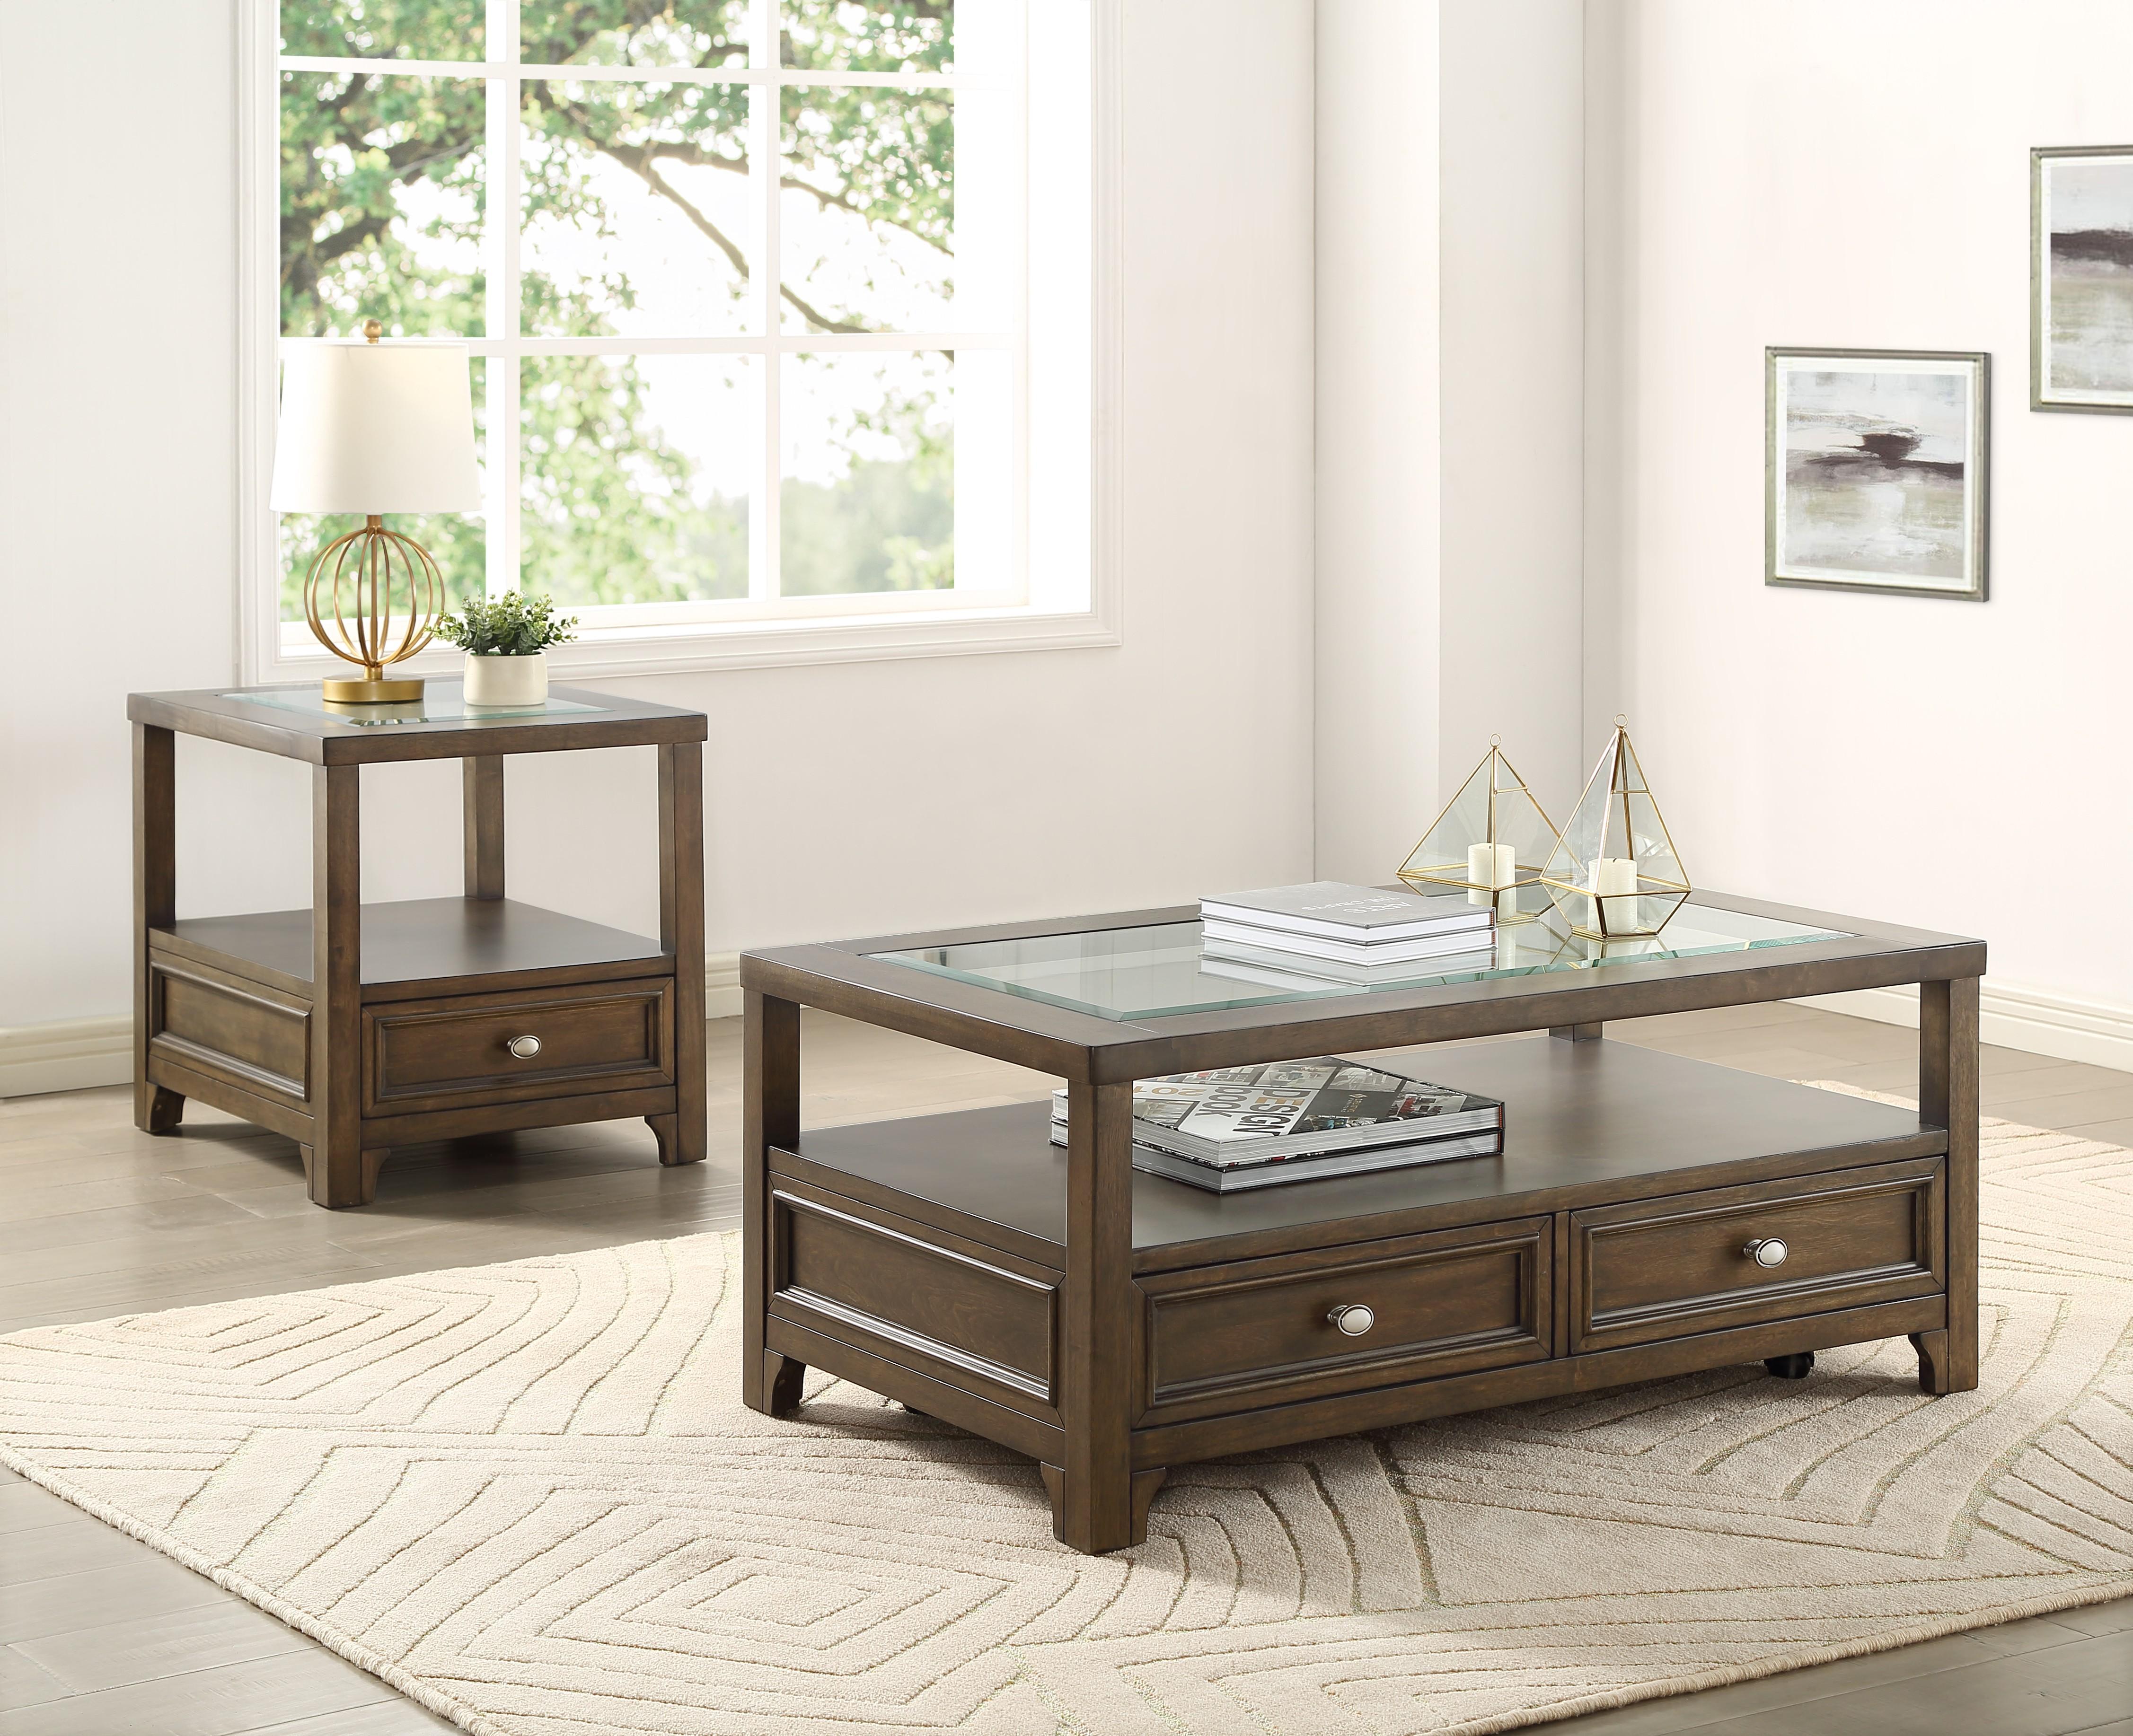 Transitional Occasional Table Set 3624-2PC Auburn 3624-2PC in Brown 